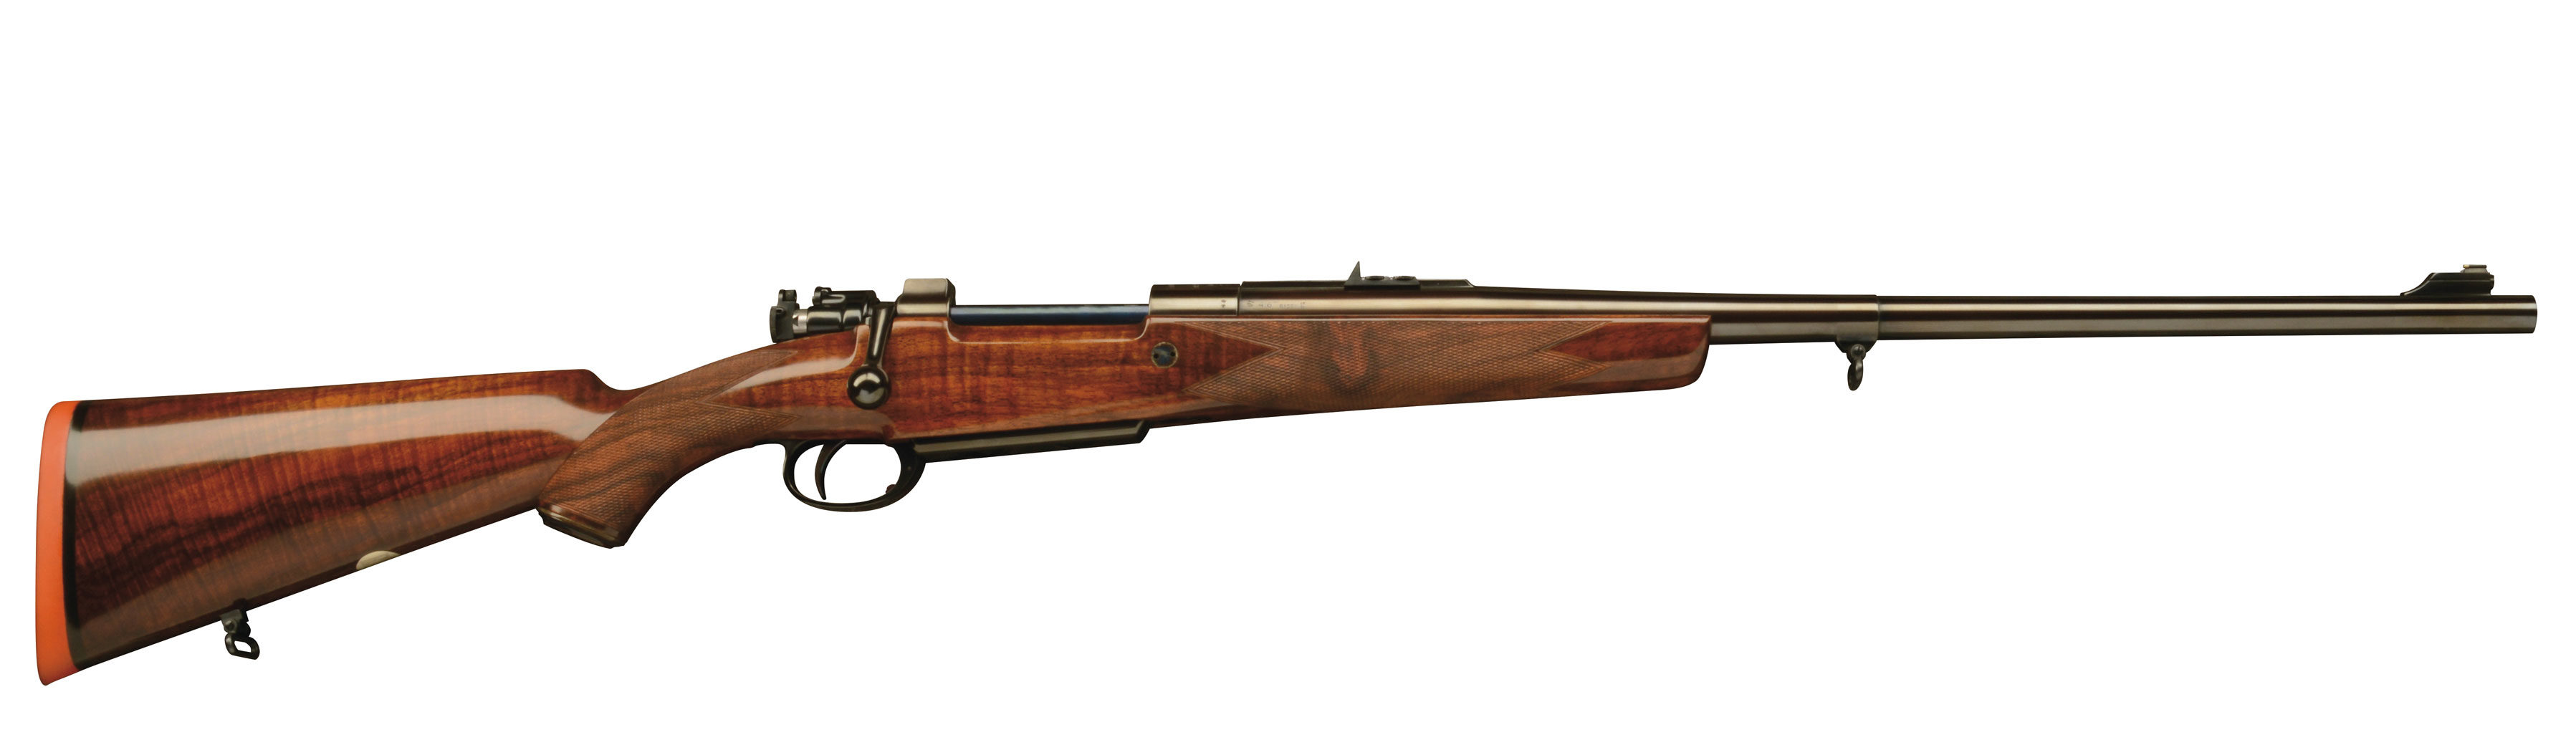 London-Best-Product-Page-Models-London-Best-Vintage-416-SSB-with-grade-7-wood-and-peep-sight-cut-1920x559@2x.jpg